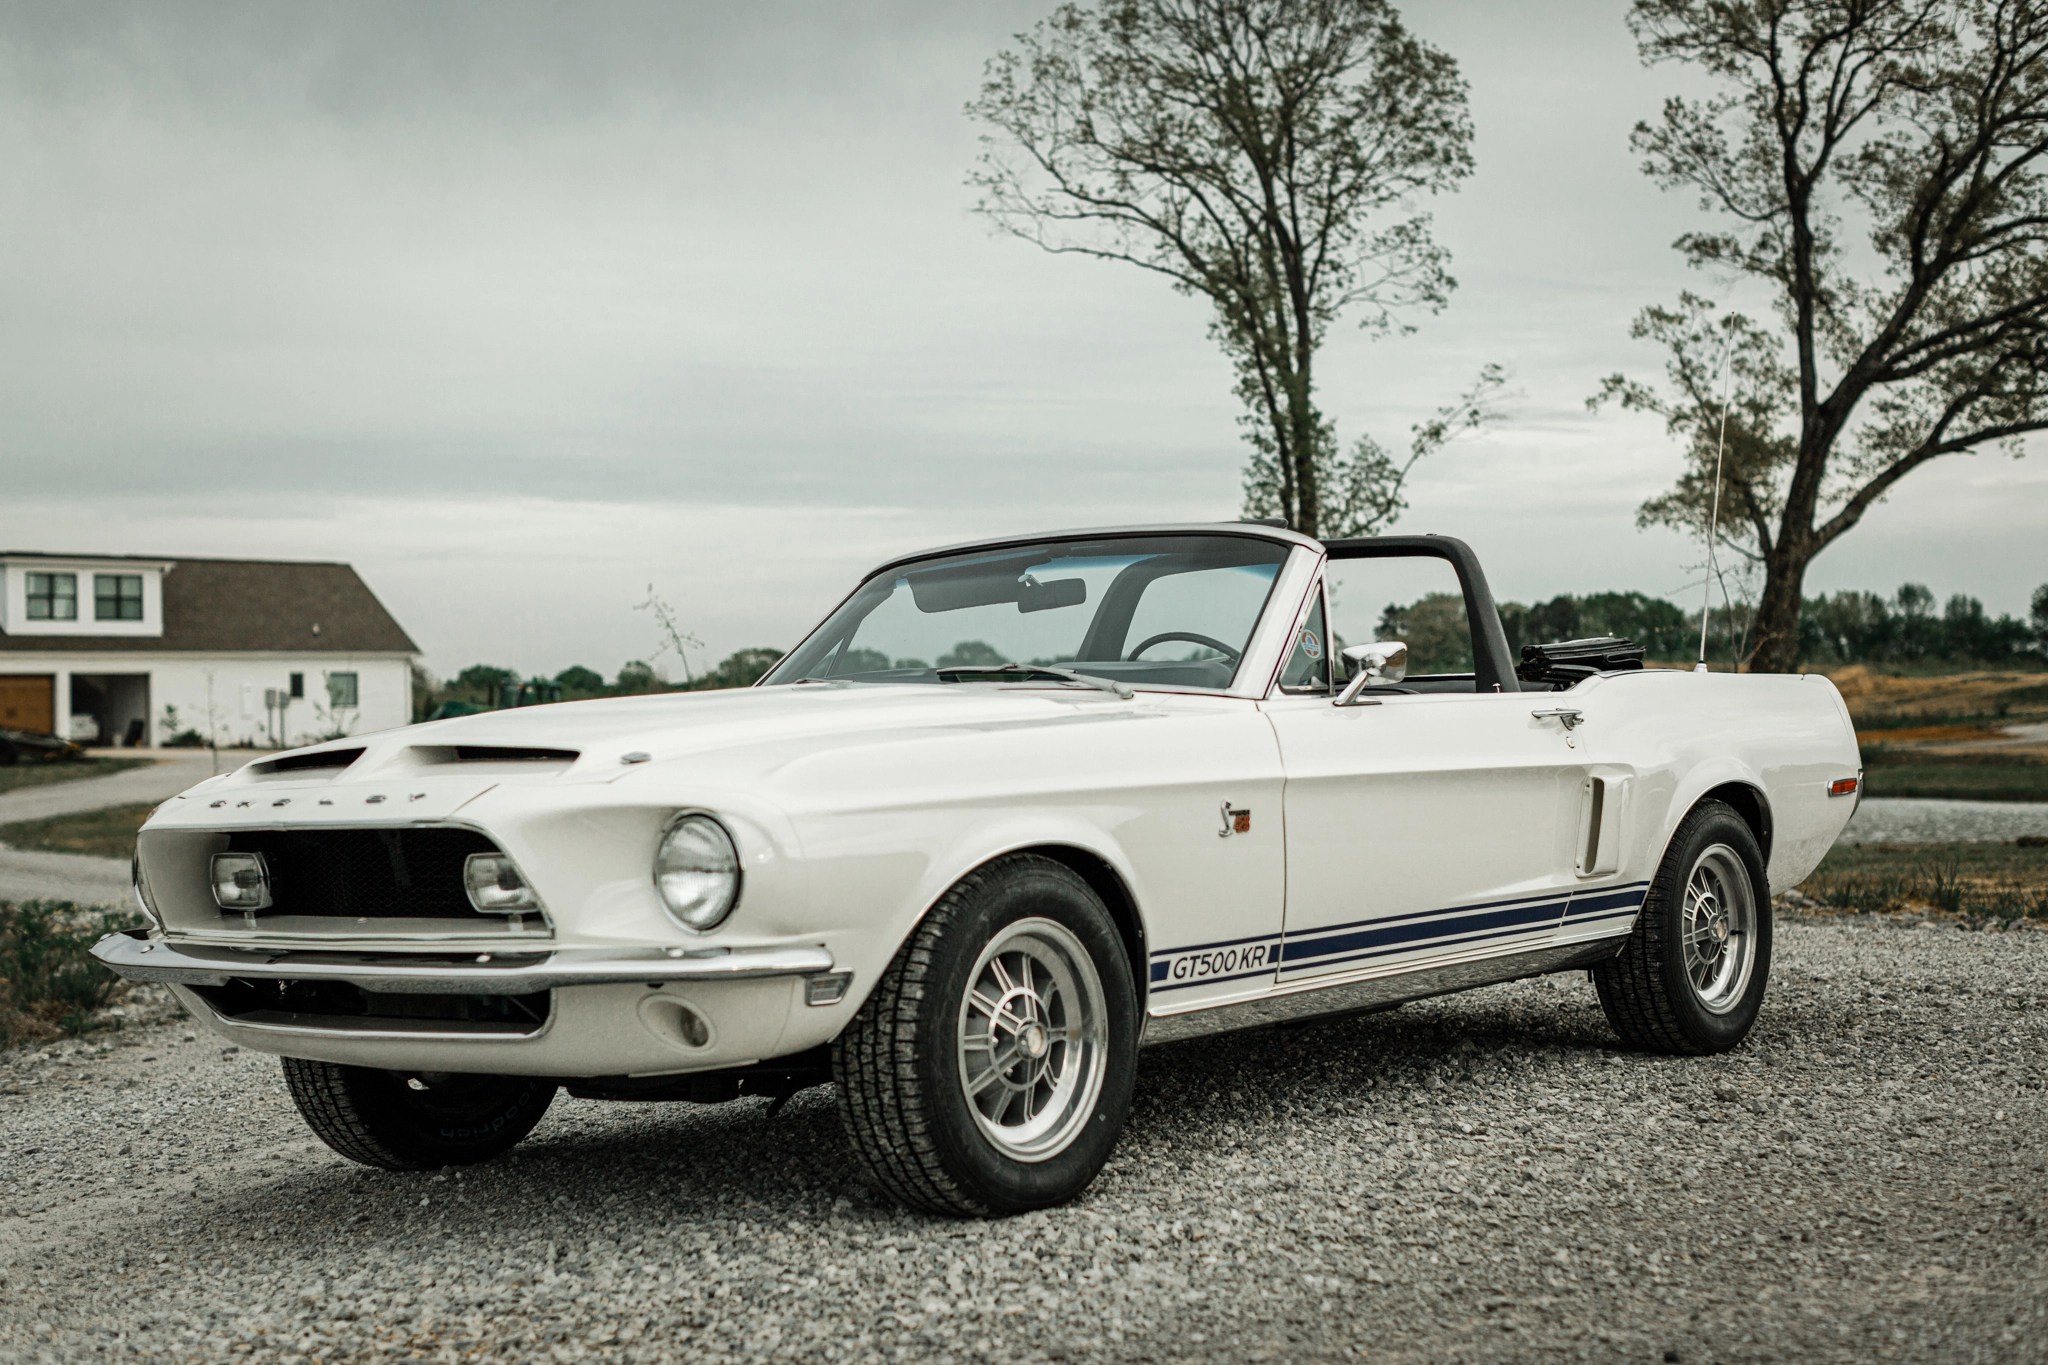 1968 Ford Mustang Shelby GT500KR Convertible 4-Speed